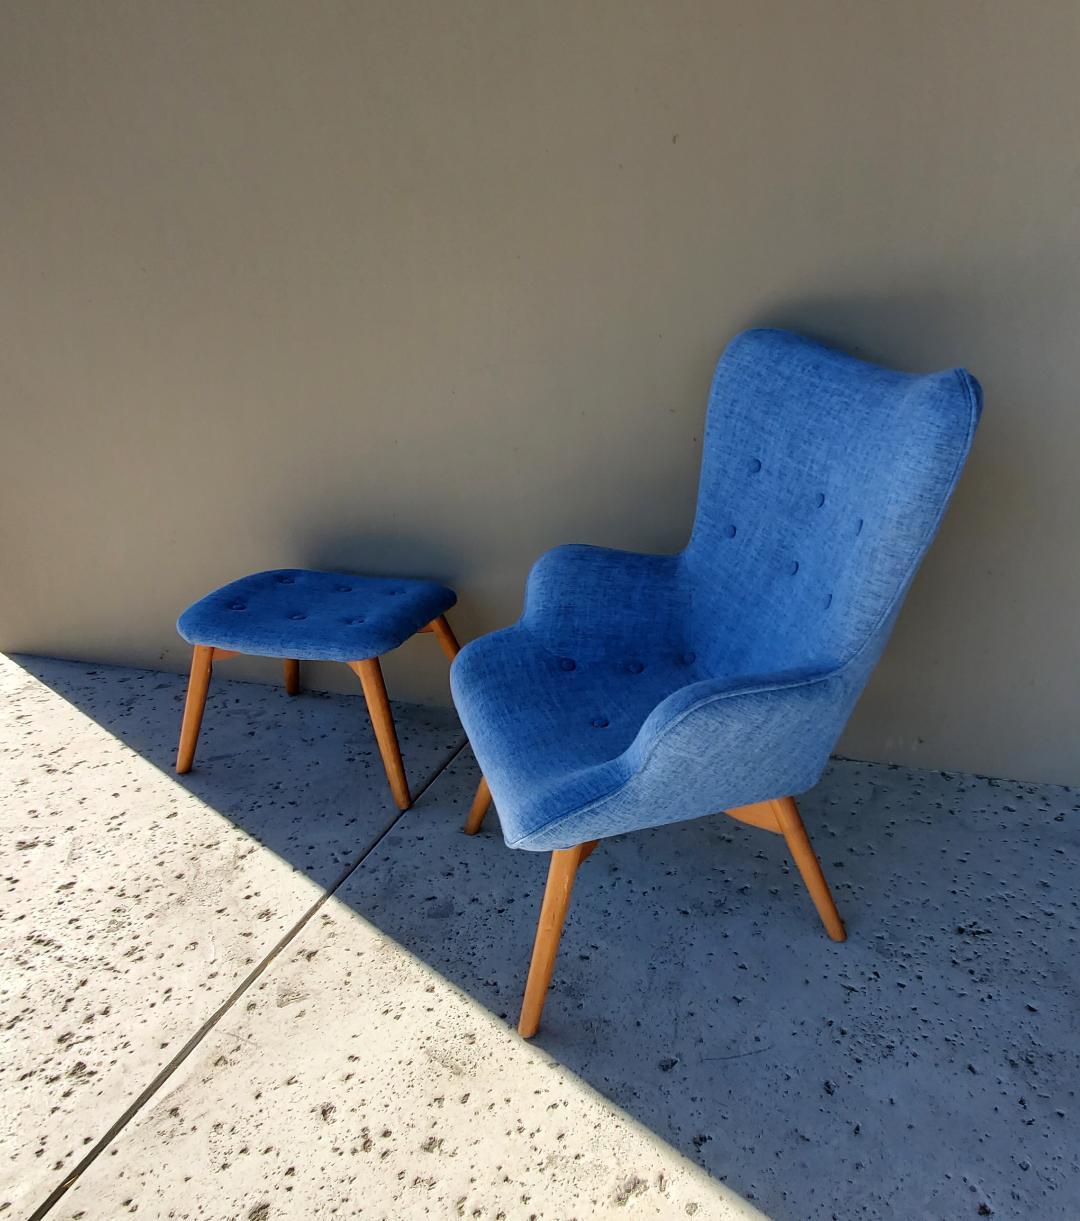 20th Century Modern Upholstered Lounge Chair With Matching Footstool / Ottoman. For Sale